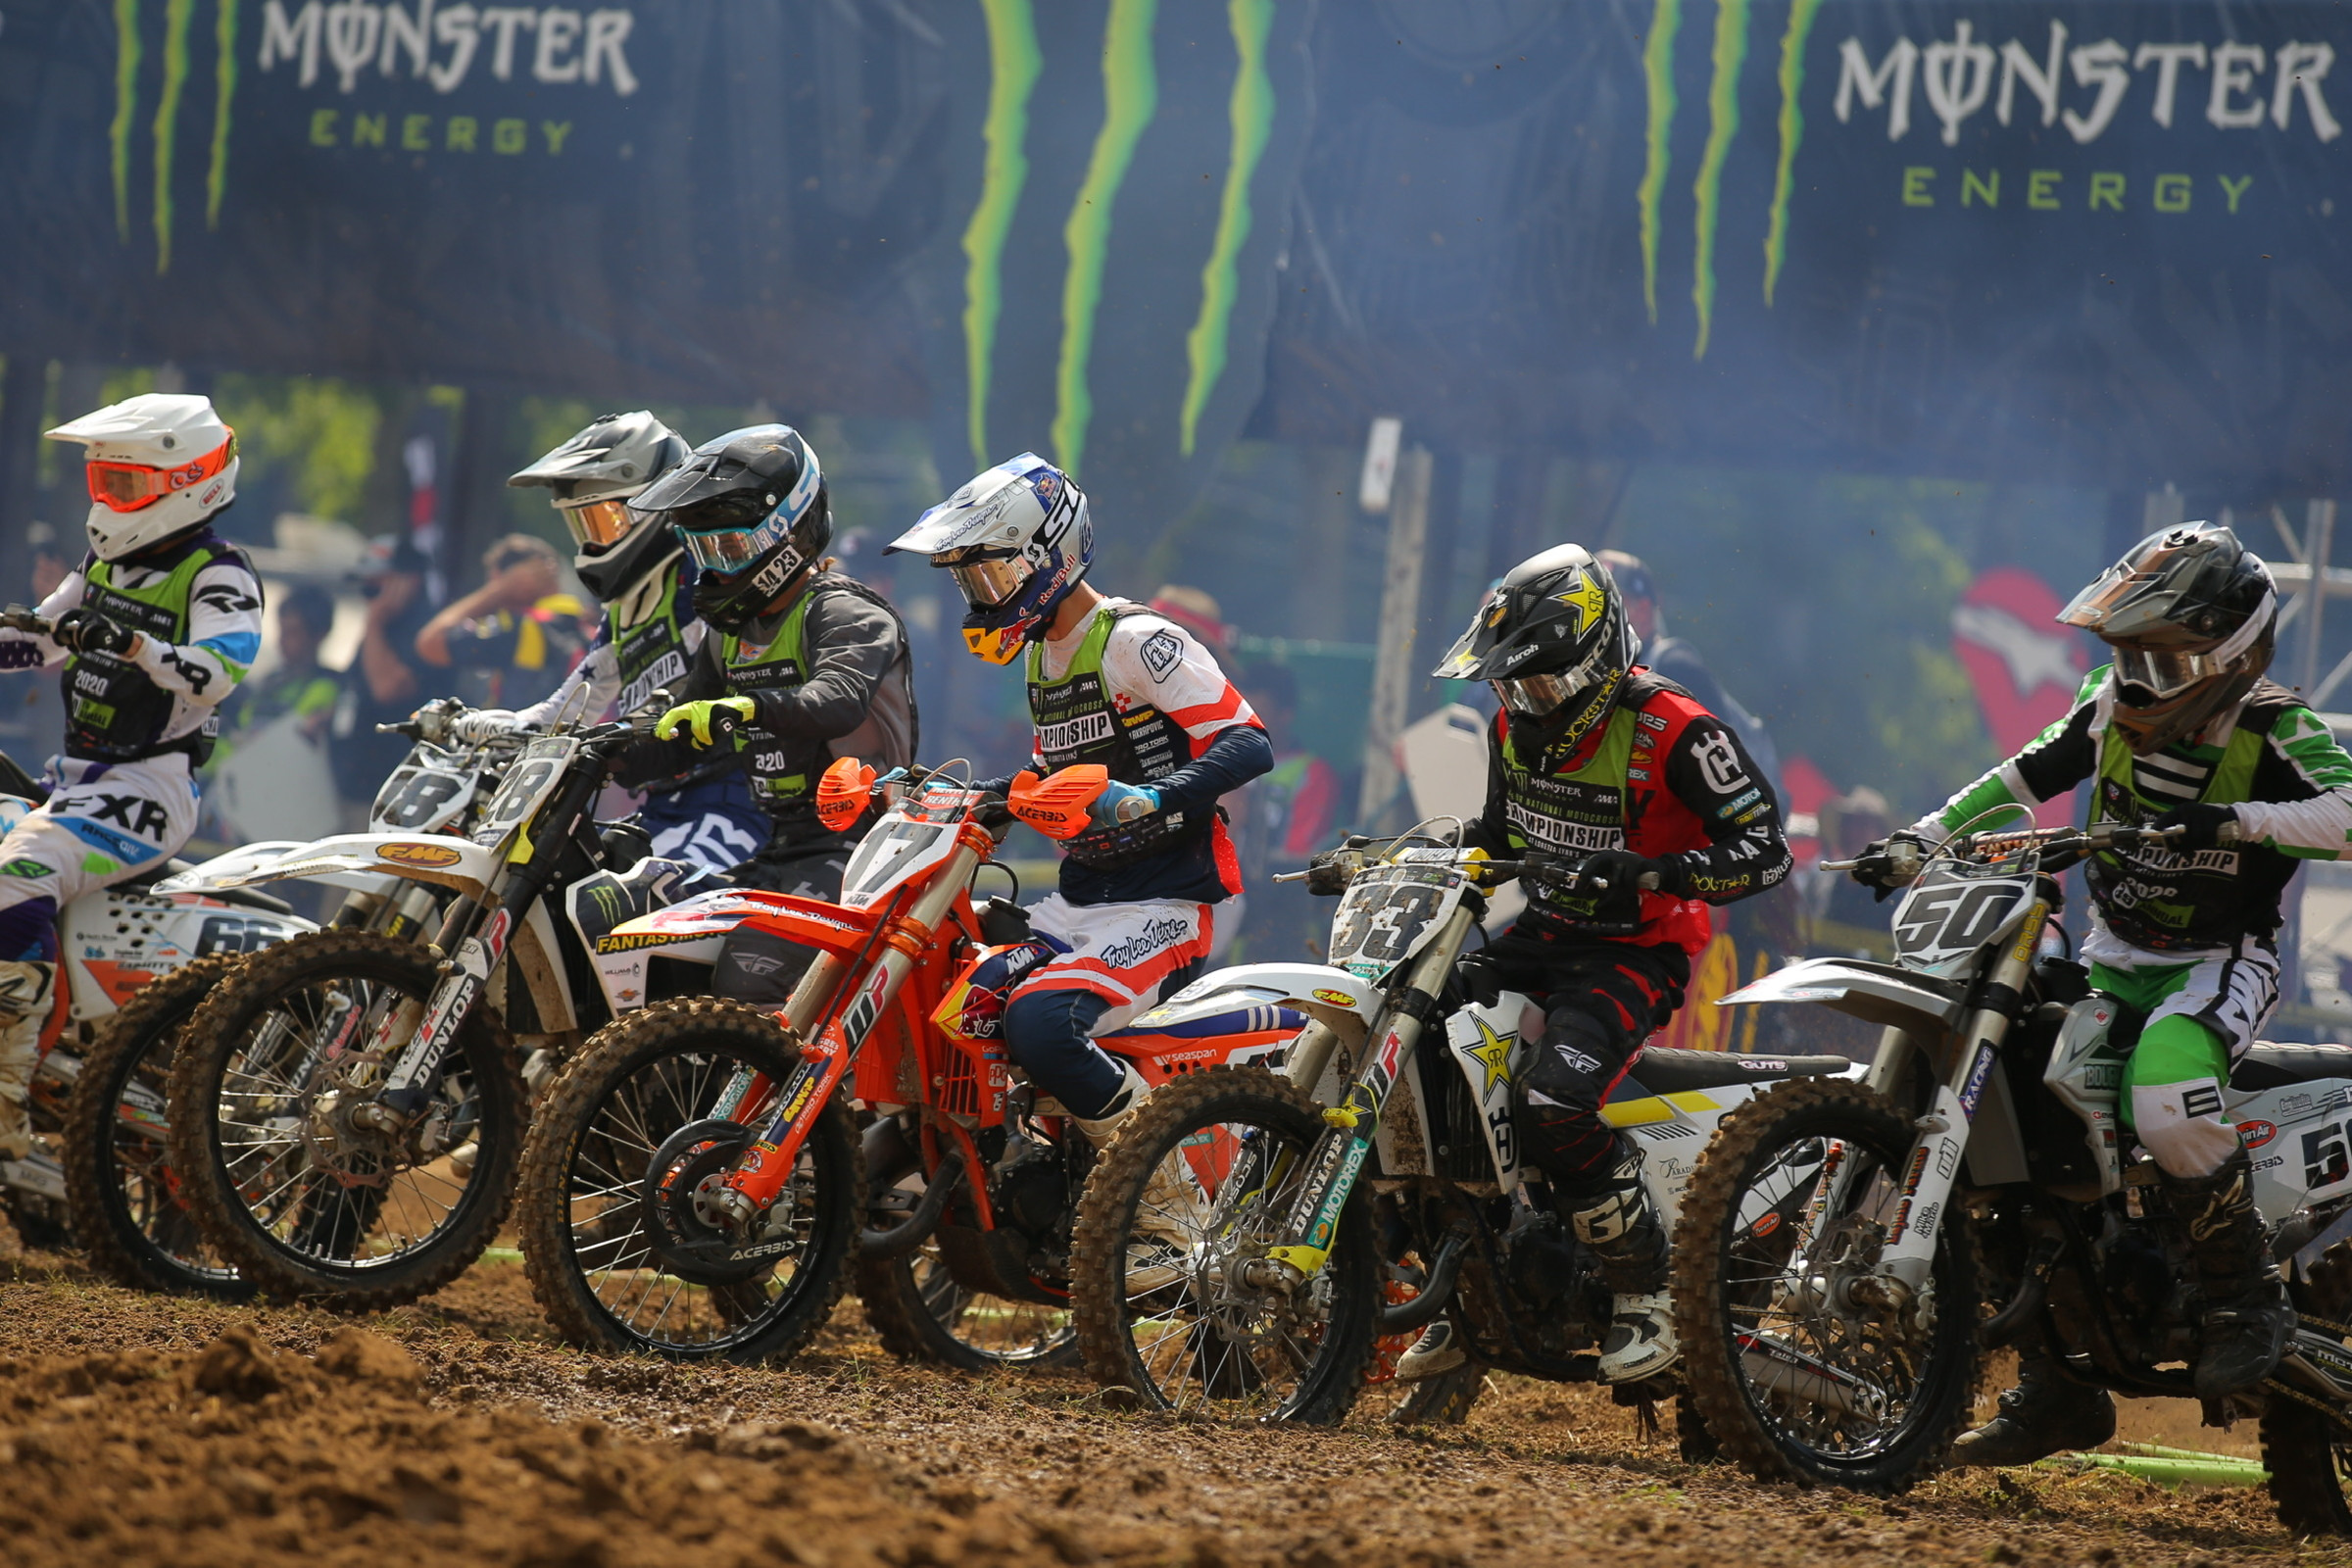 2020 MXGP of Latvia and AMA Amateur National Motocross Championship Live Stream Schedule pic picture image